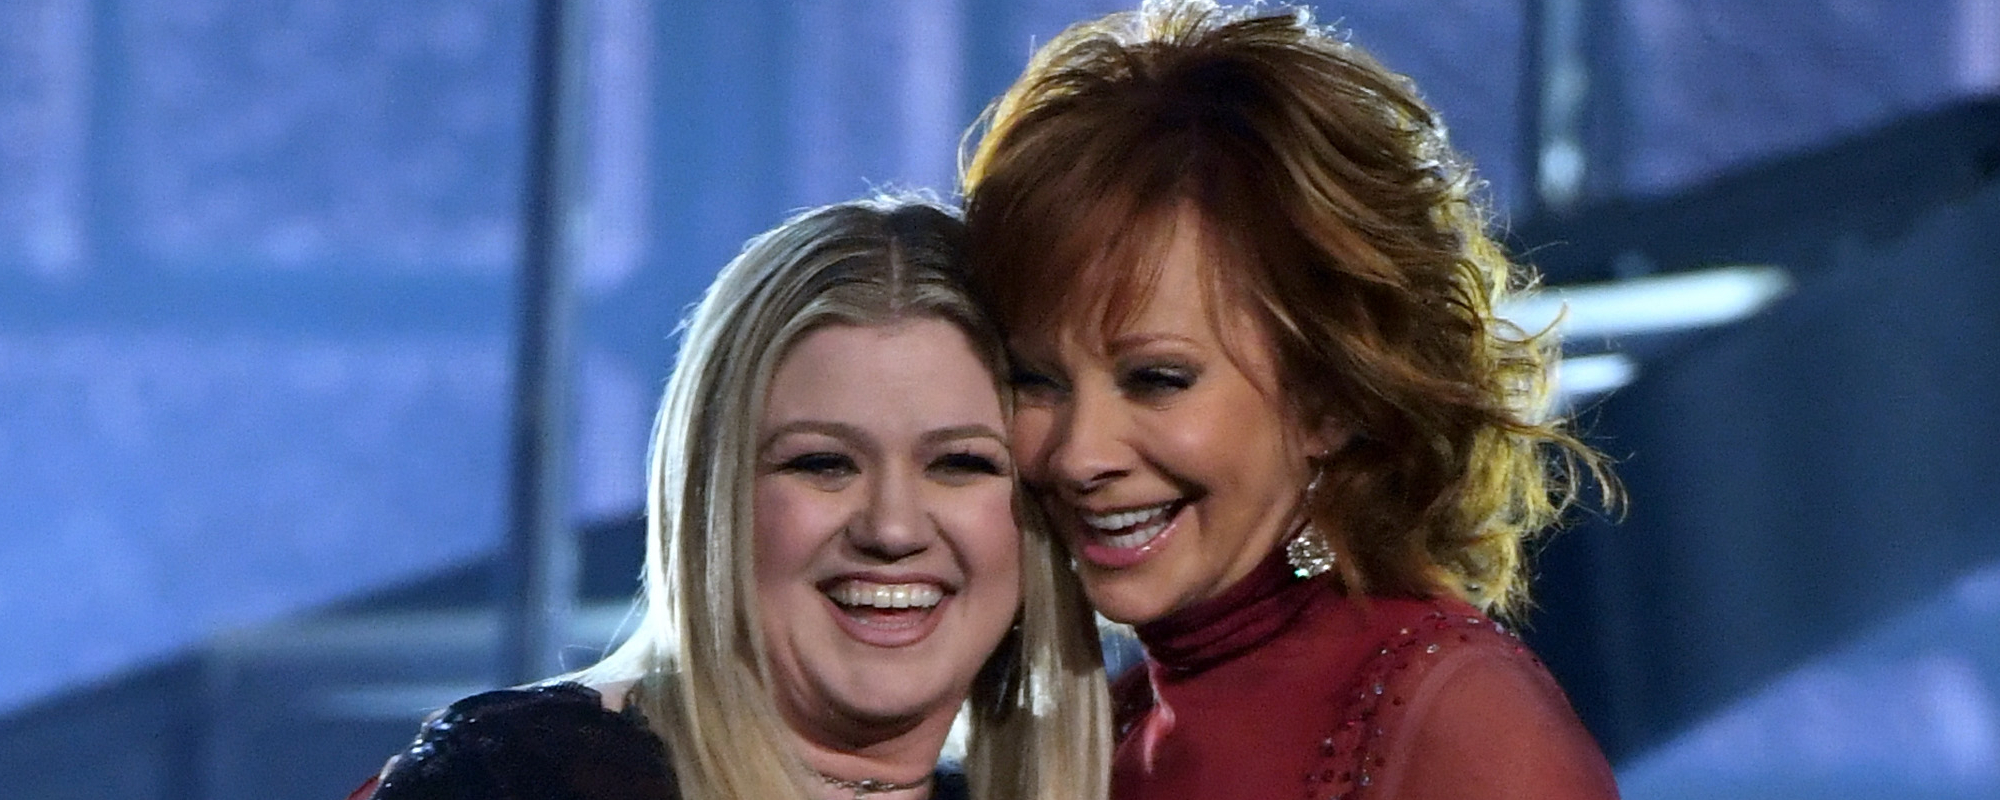 Reba McEntire Shares Sweet Messages After Kelly Clarkson Covered Her Hit Song "Till You Love Me"